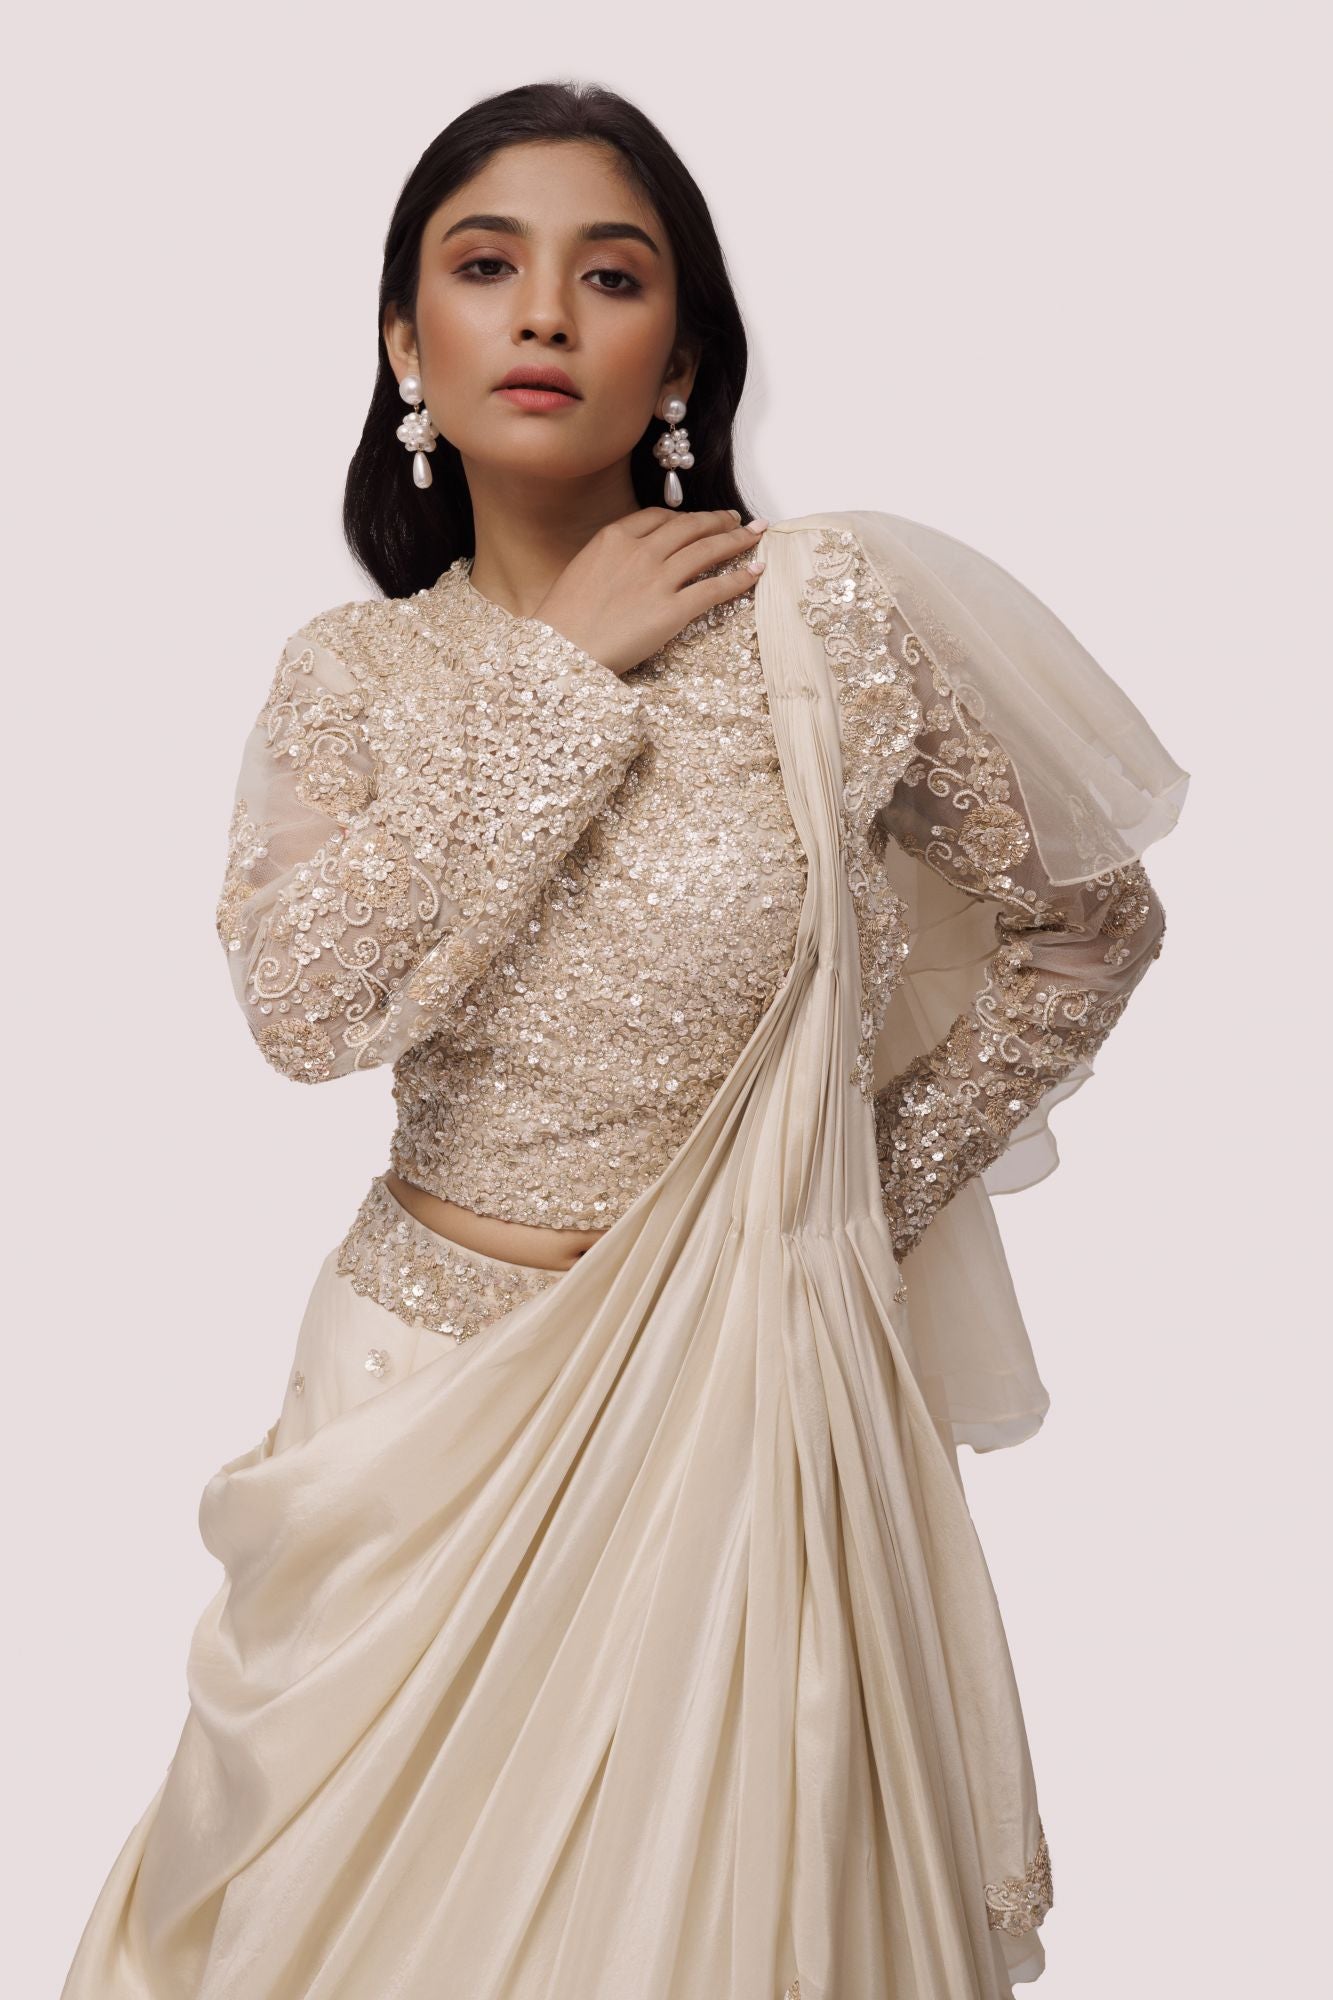 Shop the Look your best on wedding occasions in this beautiful off-white color lehenga with sequin embroidery on the blouse and a beautiful ruffle dupatta. Dazzle on weddings and special occasions with exquisite Indian designer dresses, sharara suits, Anarkali suits, bridal lehengas, and sharara suits from Pure Elegance Indian clothing store in the USA. Shop online from Pure Elegance.